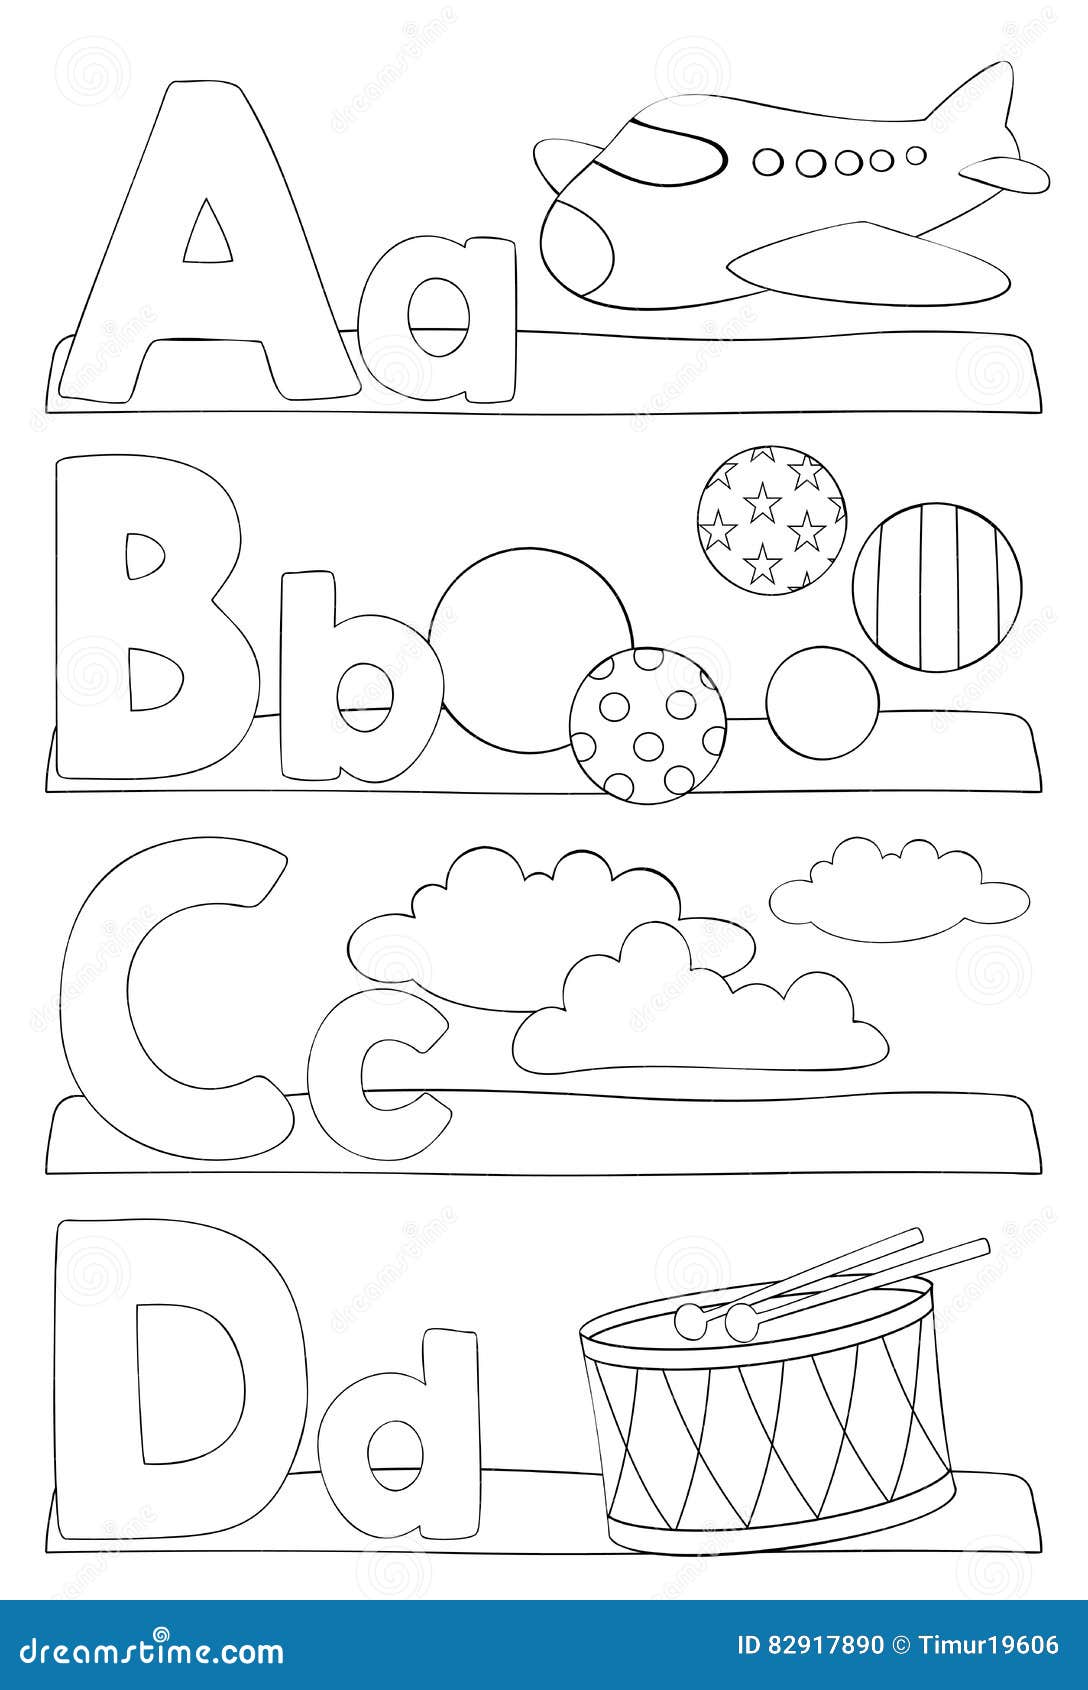 alphabet coloring page letters a b c d stock vector